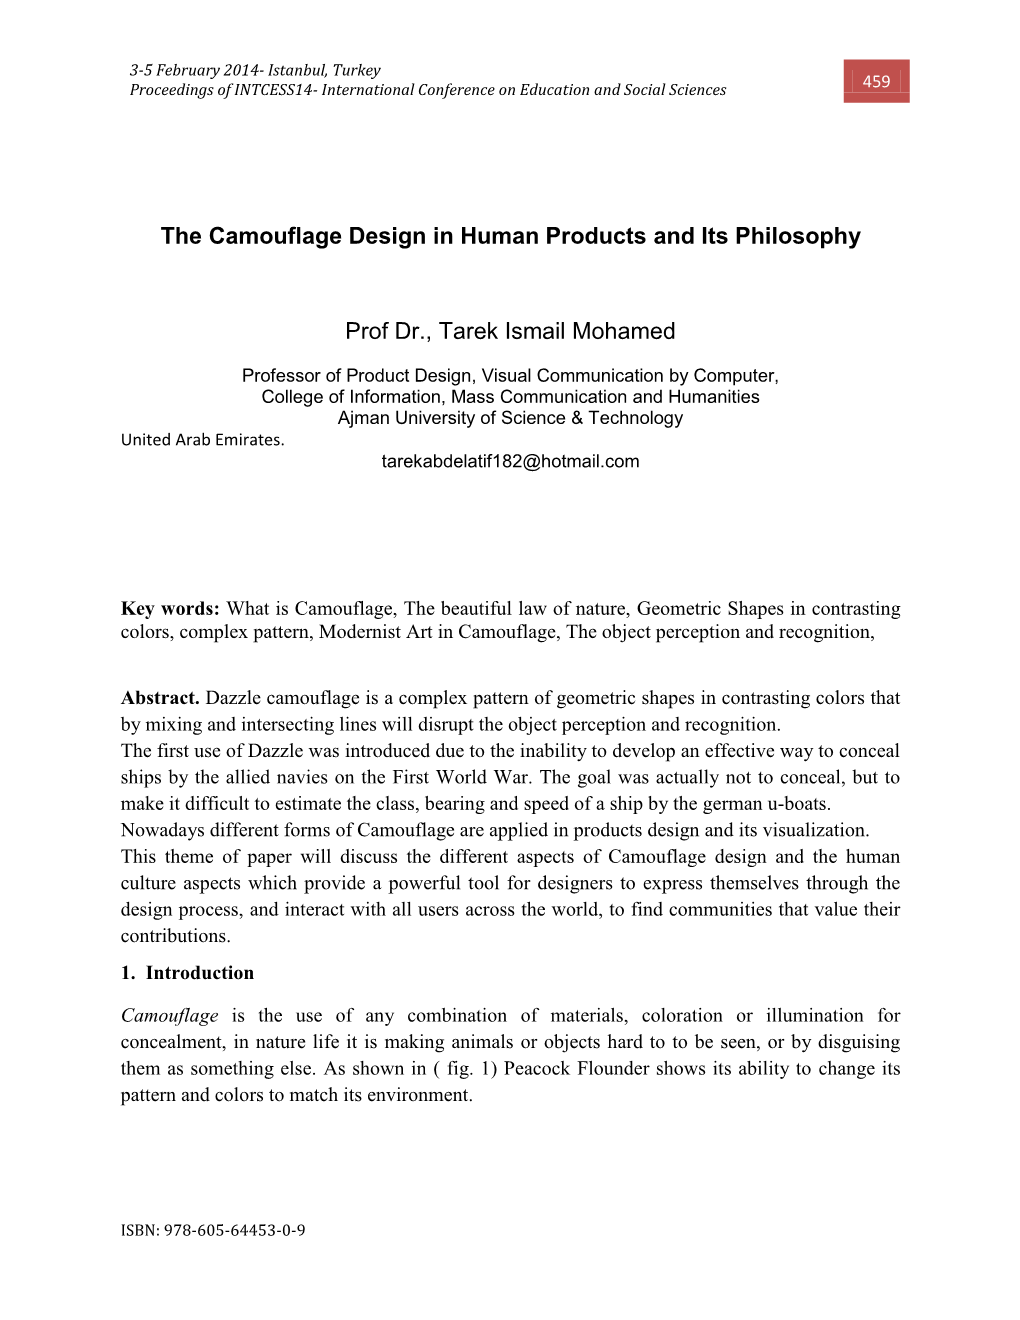 The Camouflage Design in Human Products and Its Philosophy